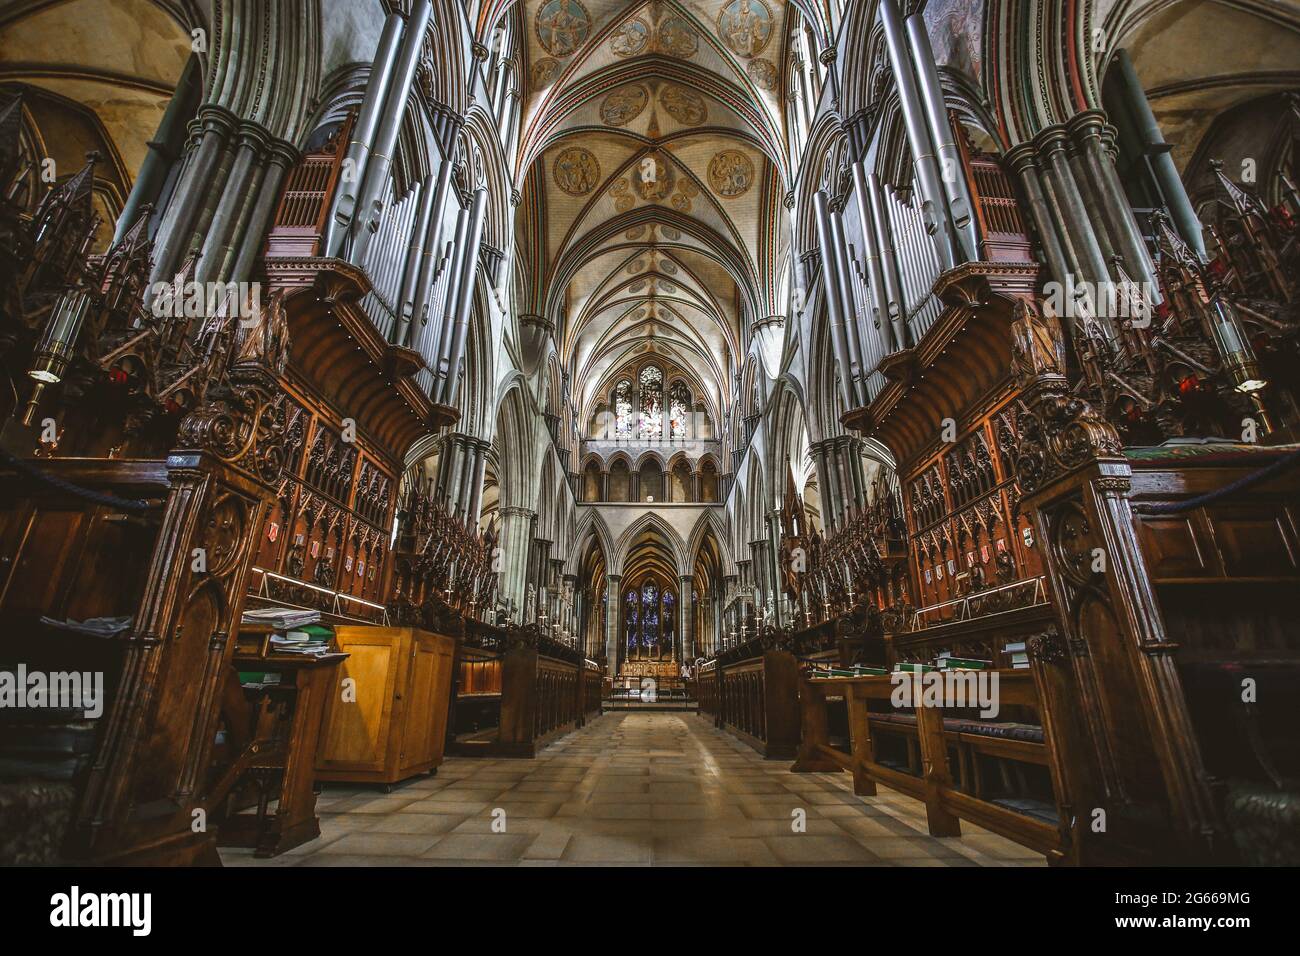 Interior of the ancient Salisbury Cathedral Stock Photo